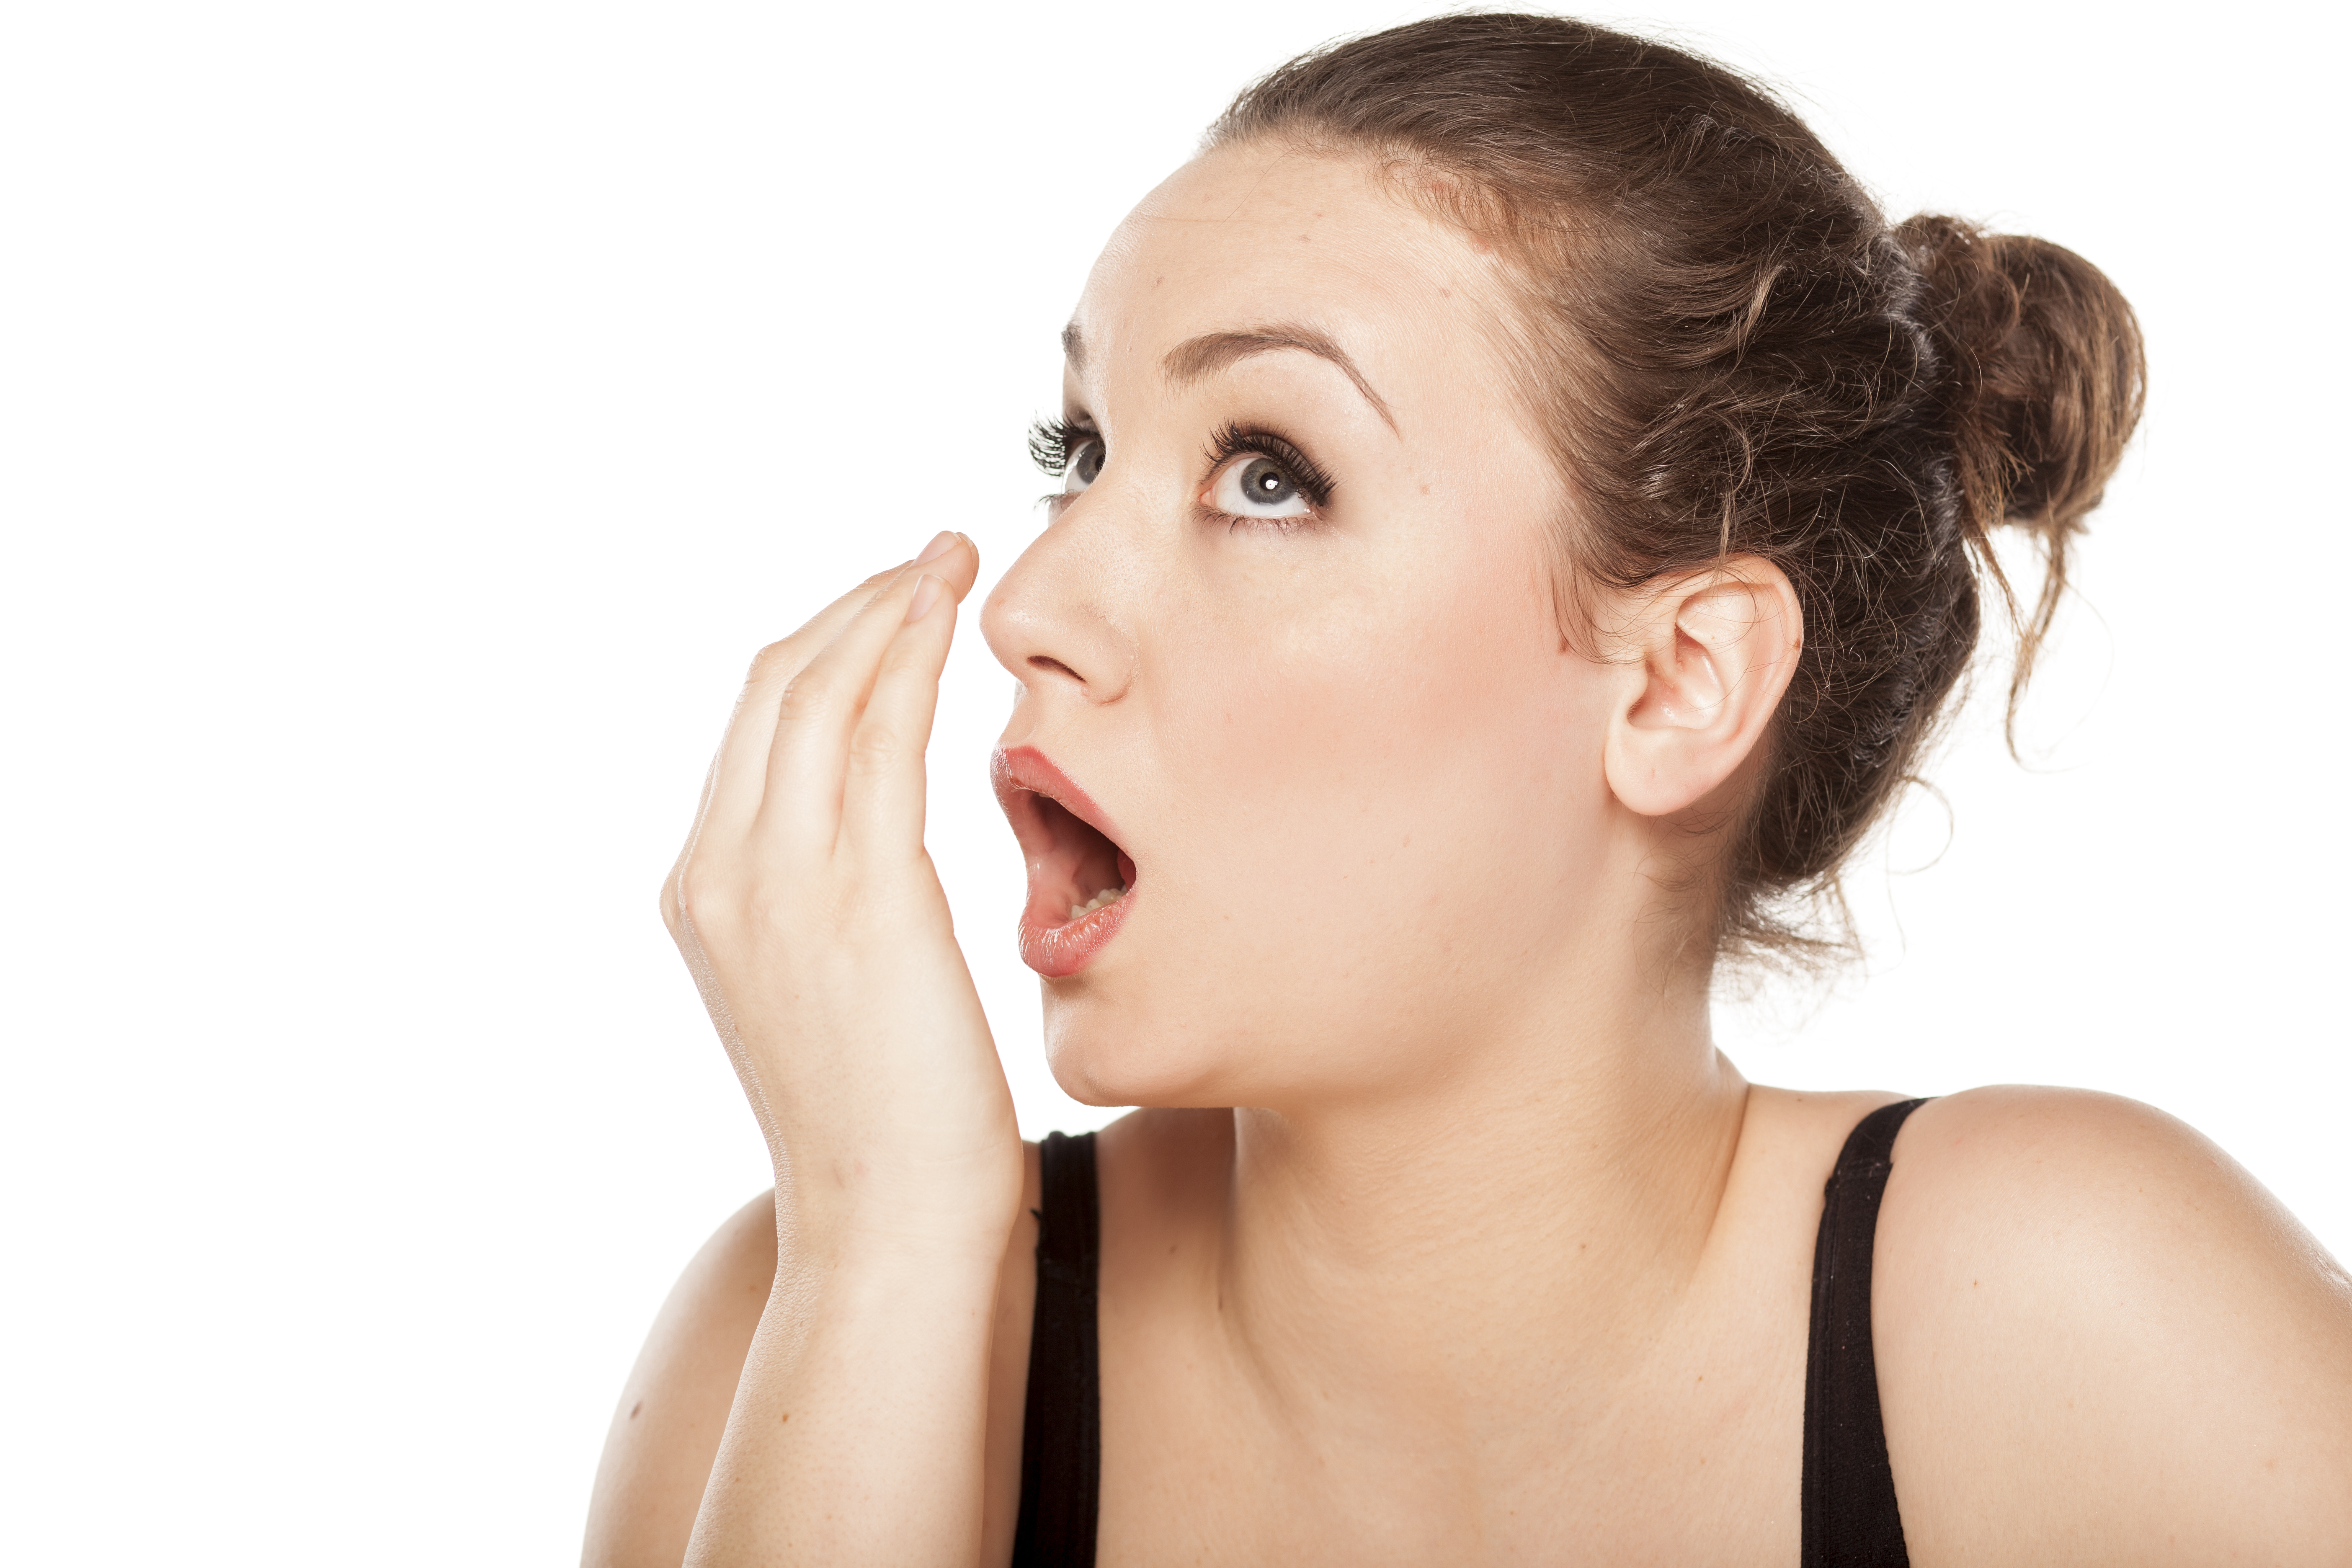 8 Causes of Bad Breath